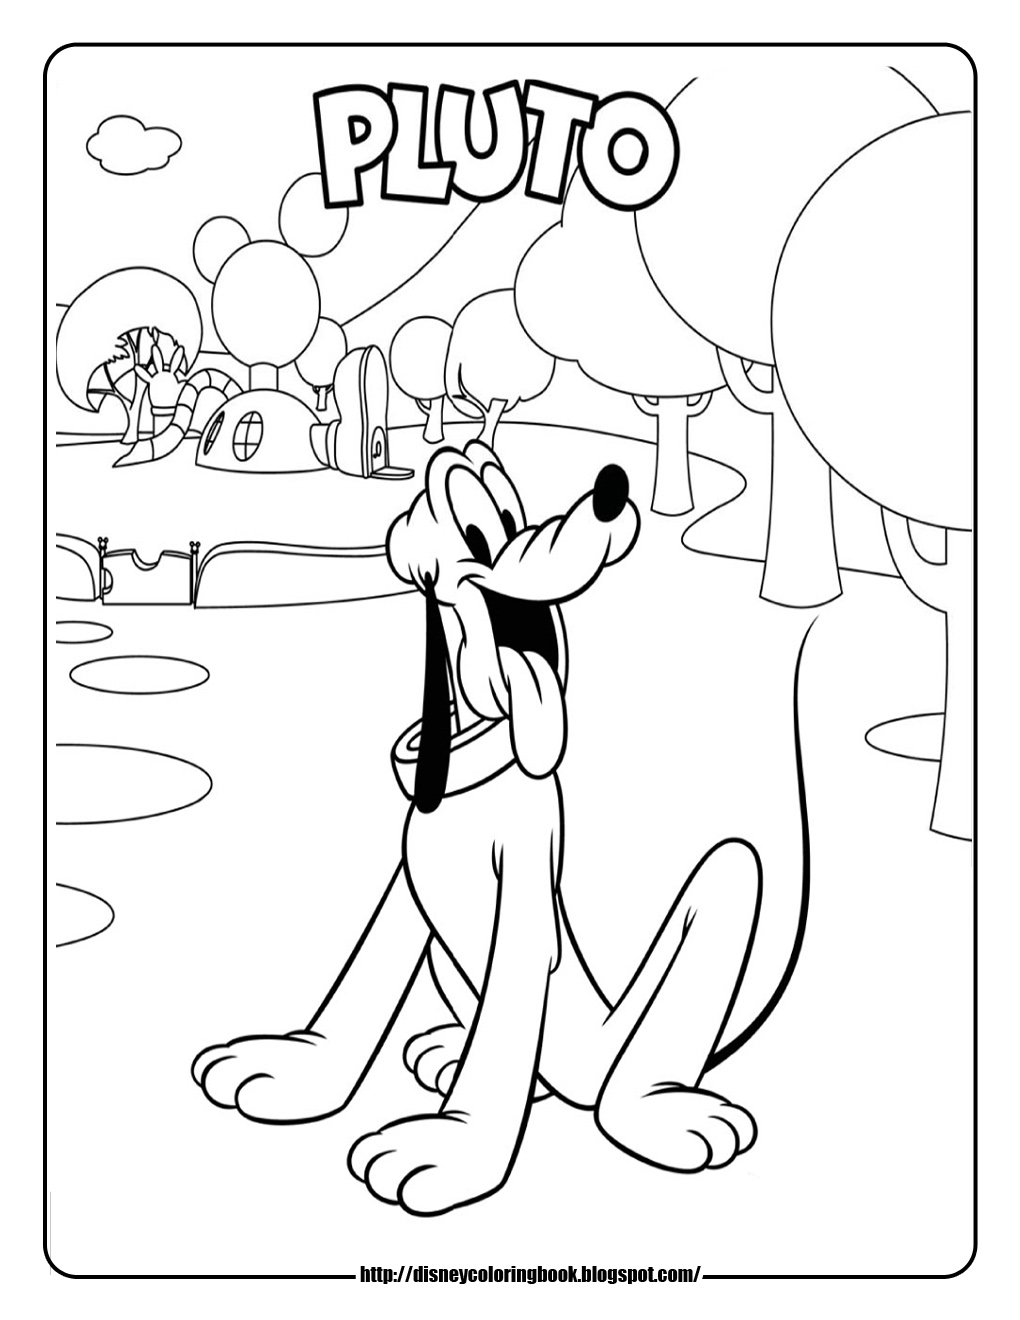 Disney Coloring Pages and Sheets for Kids: Mickey Mouse 